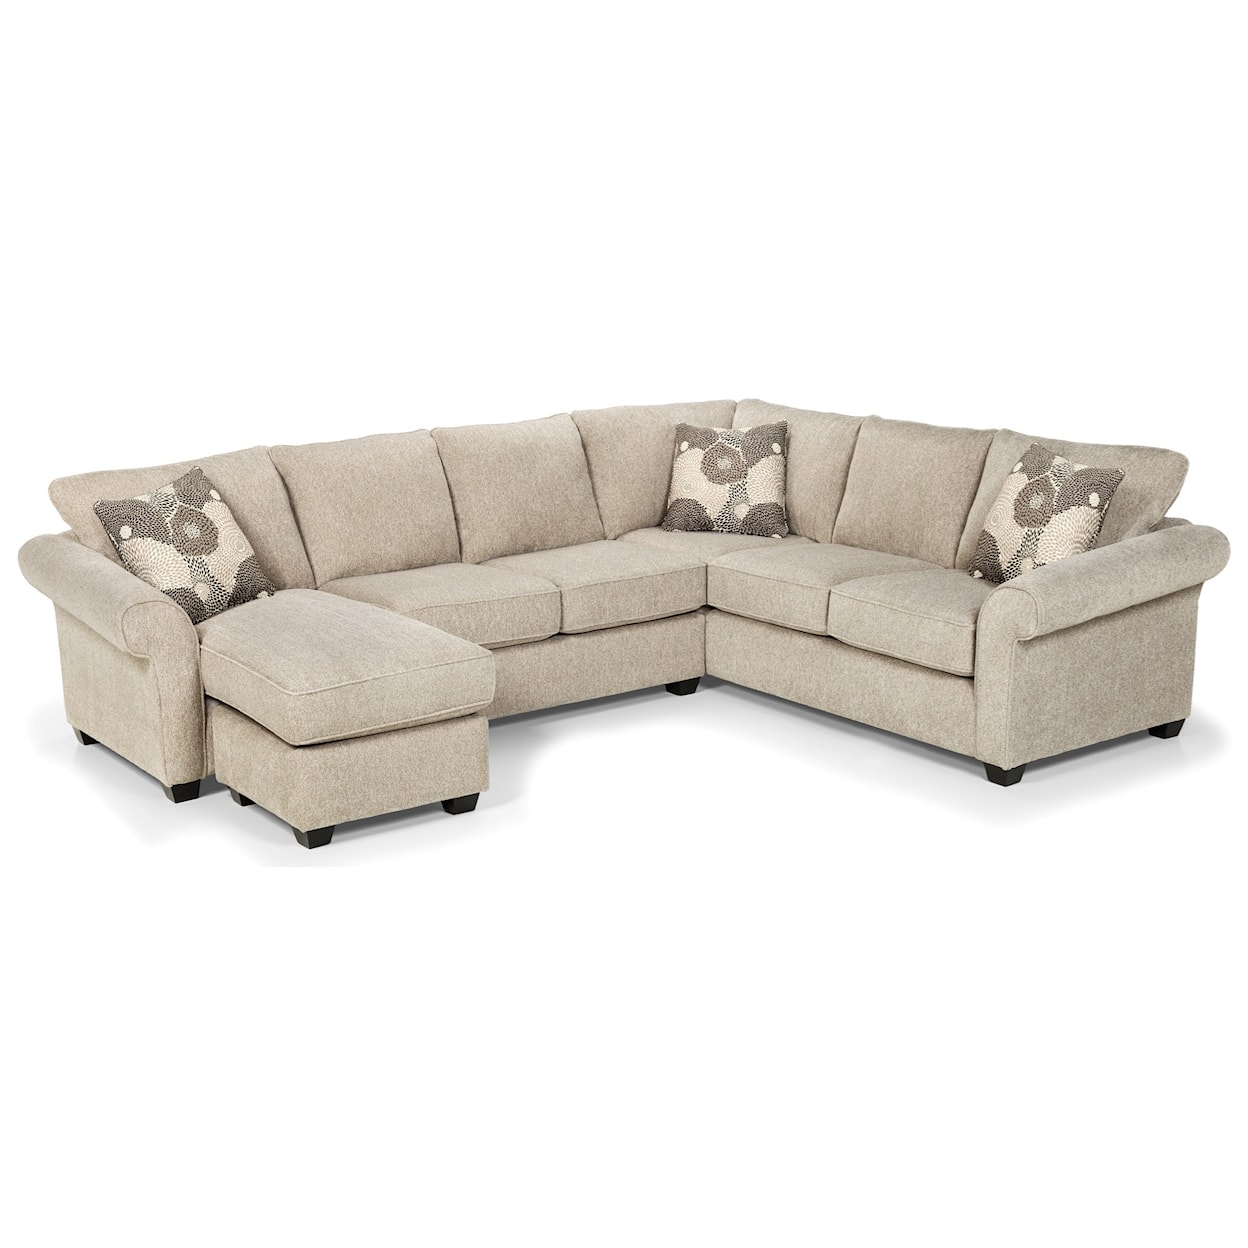 Stanton 464 5-Seat Sectional Sofa w/ LAF Chaise & Storag